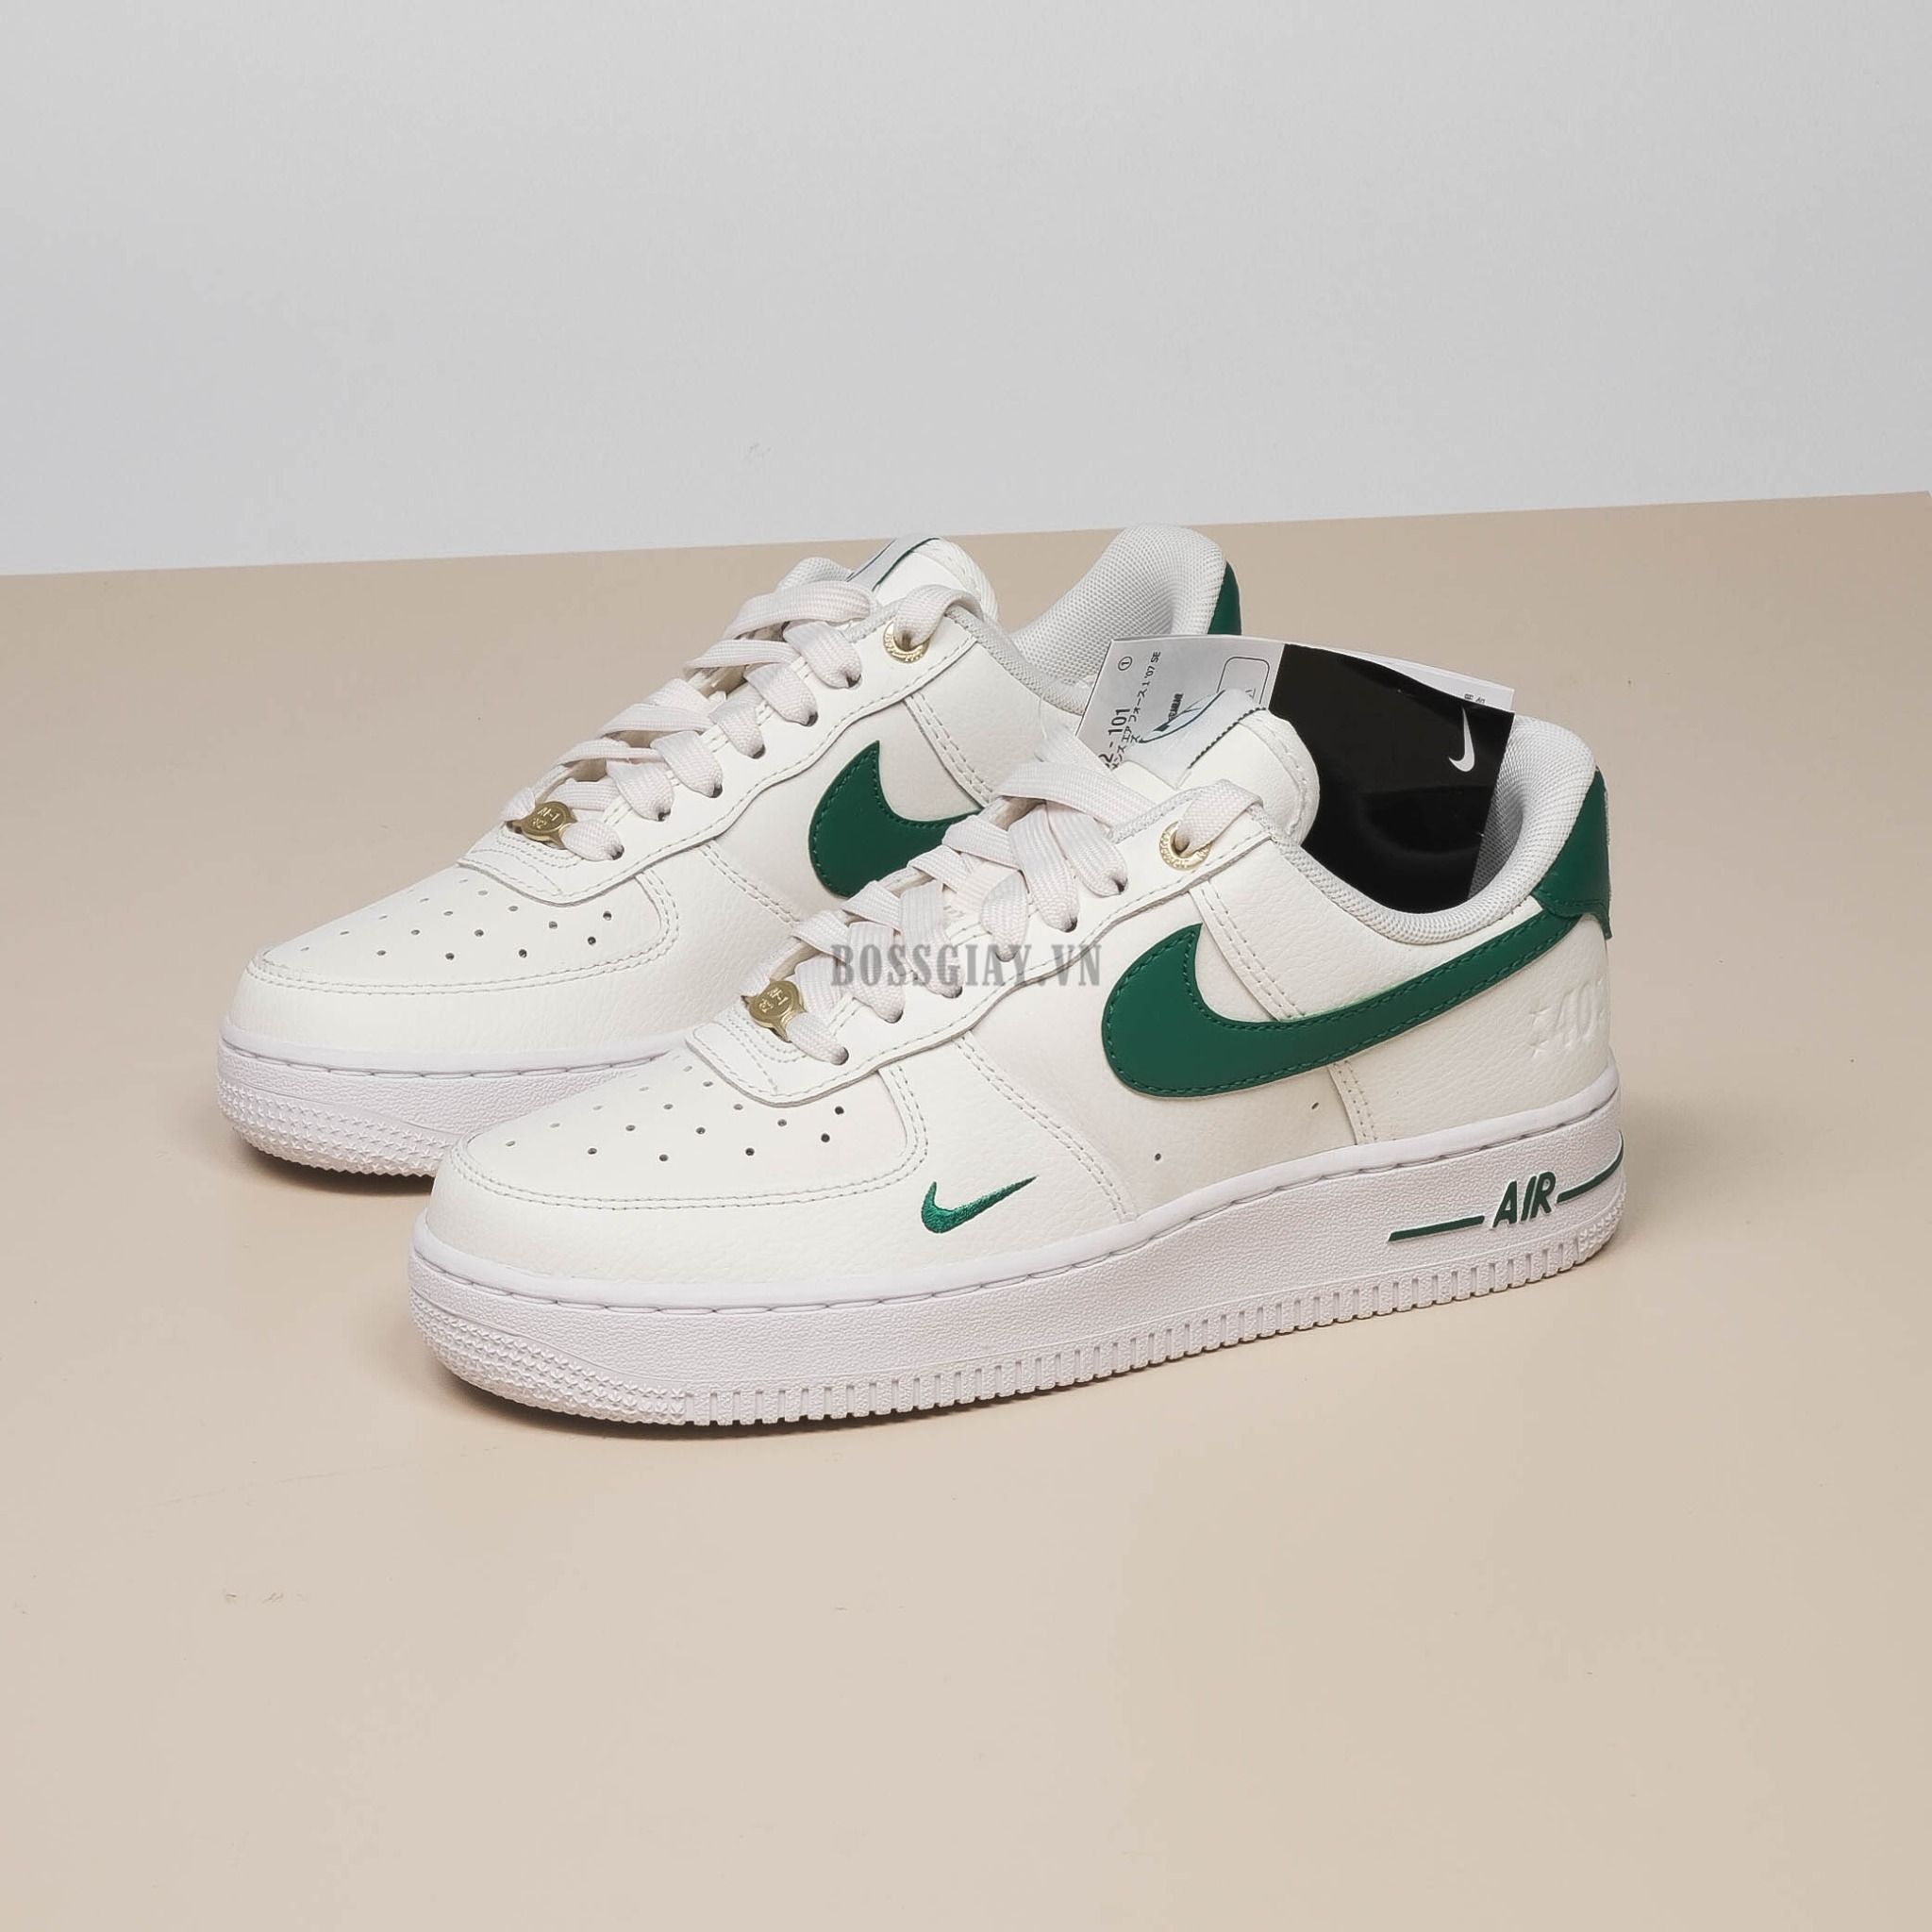 Buy Nike Air Force 1 '07 LV8 DQ7658-101 - NOIRFONCE